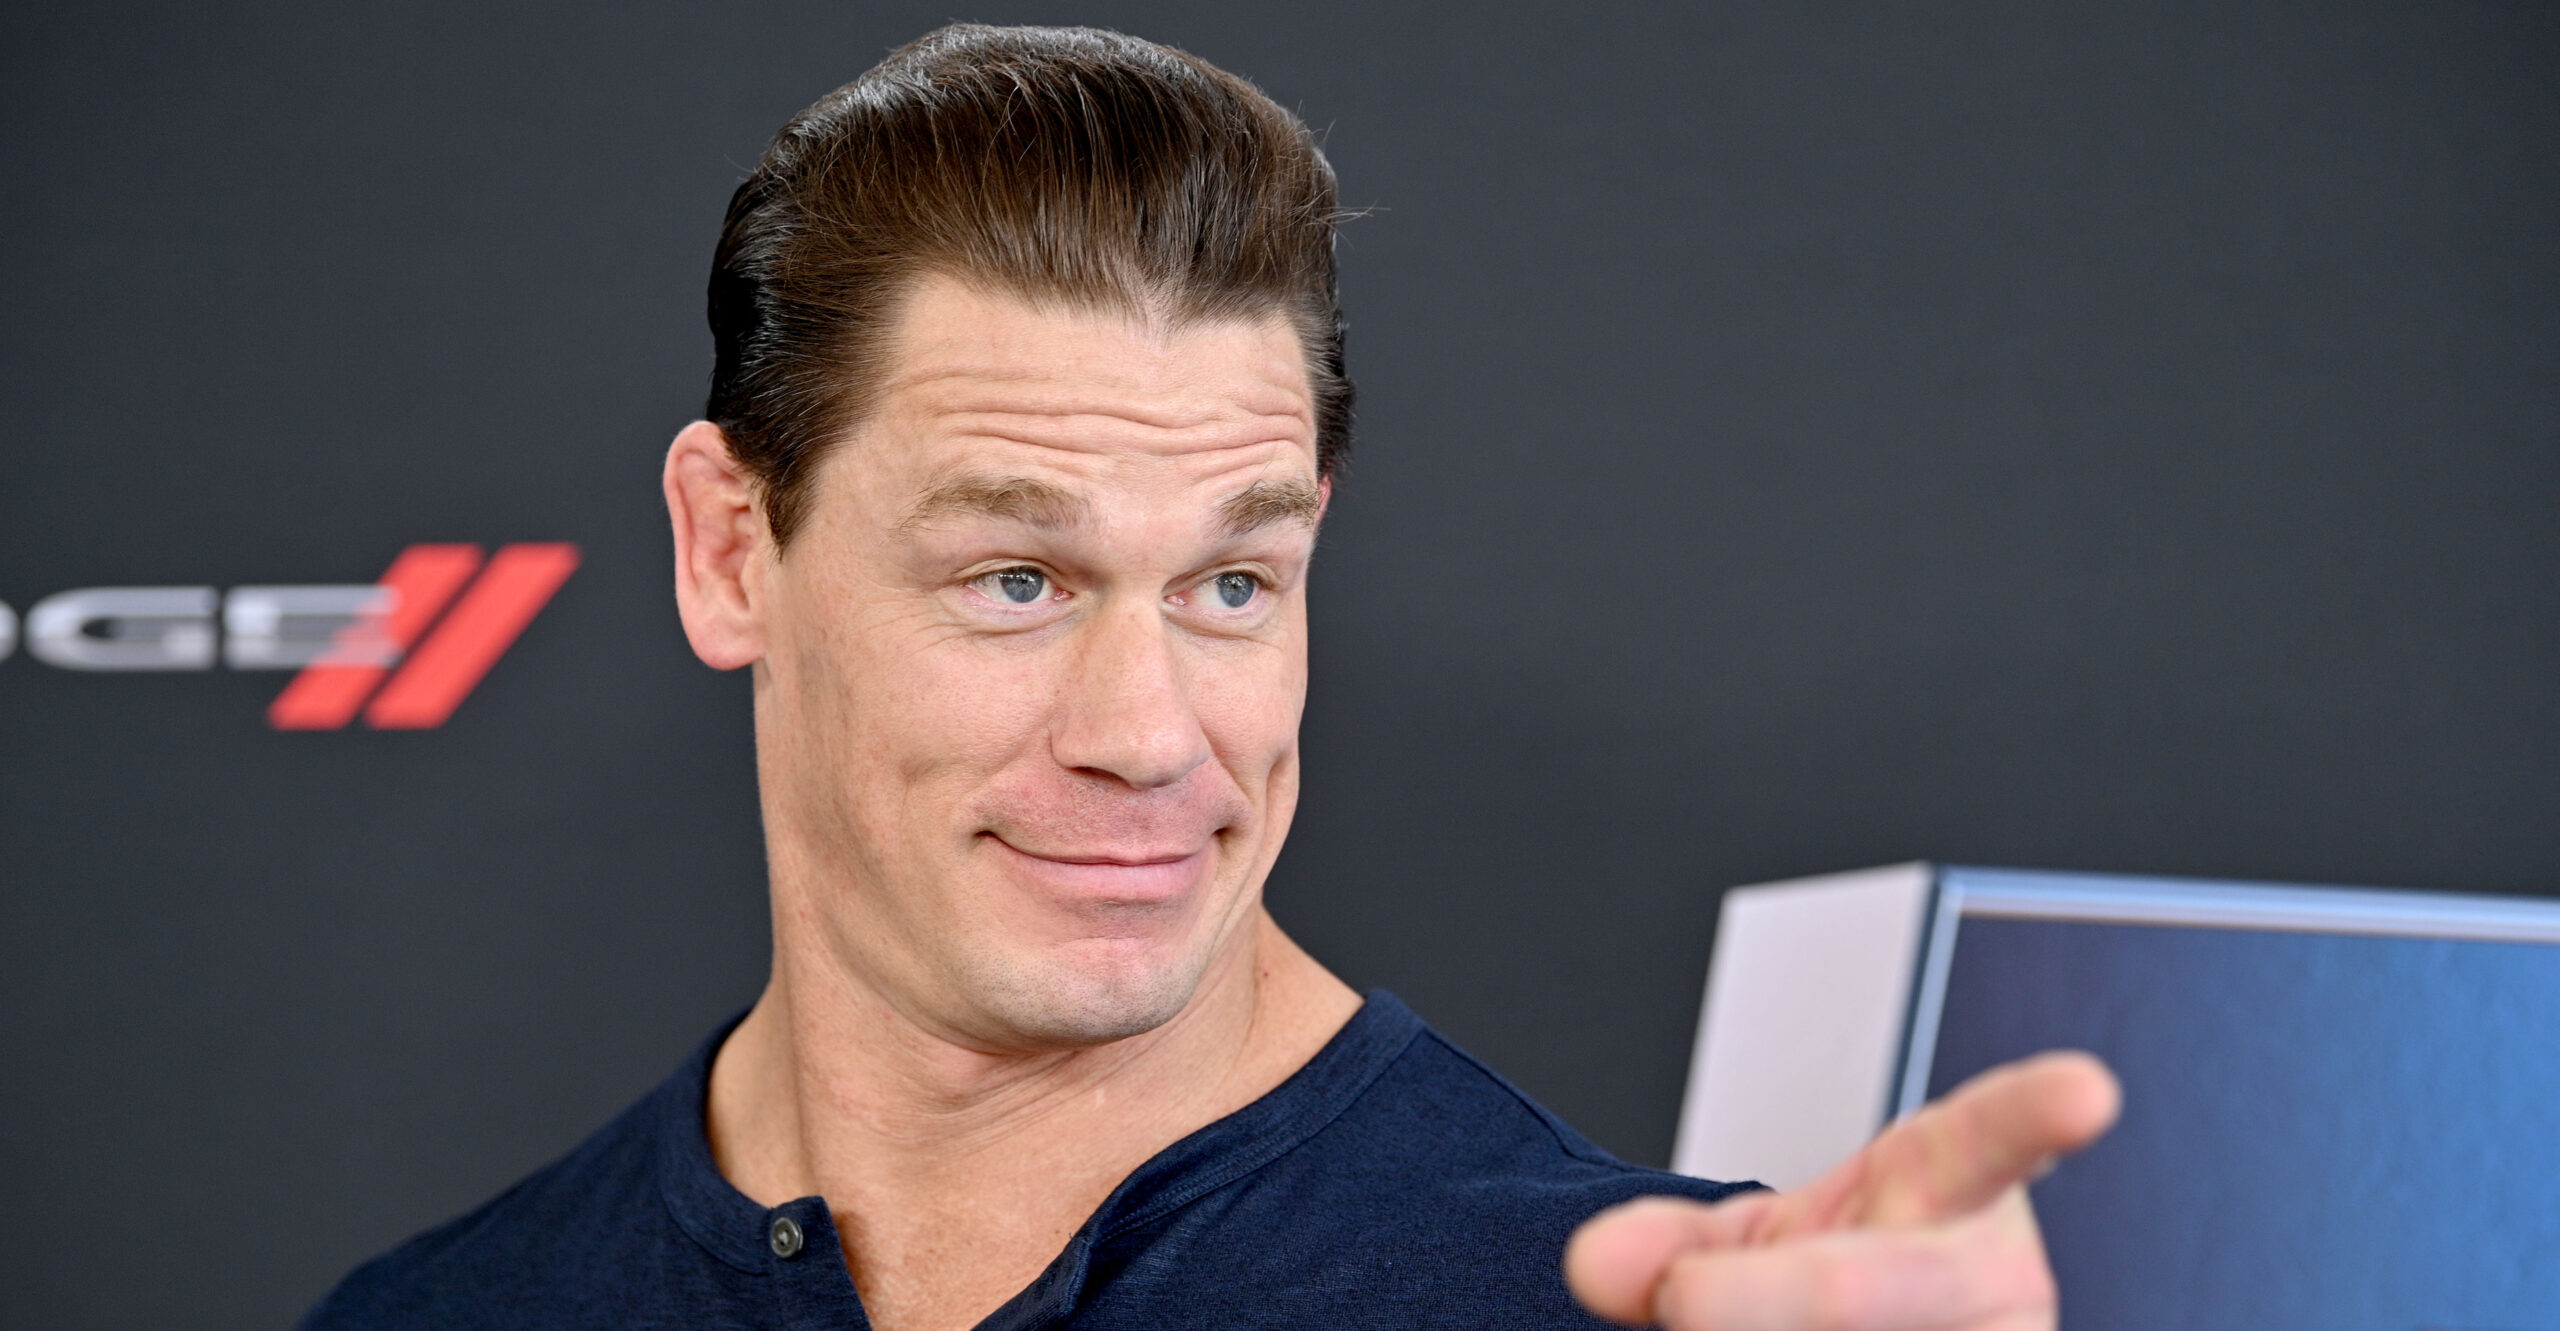 John Cena's Groveling to China Previews World Where We Must Live by Lies